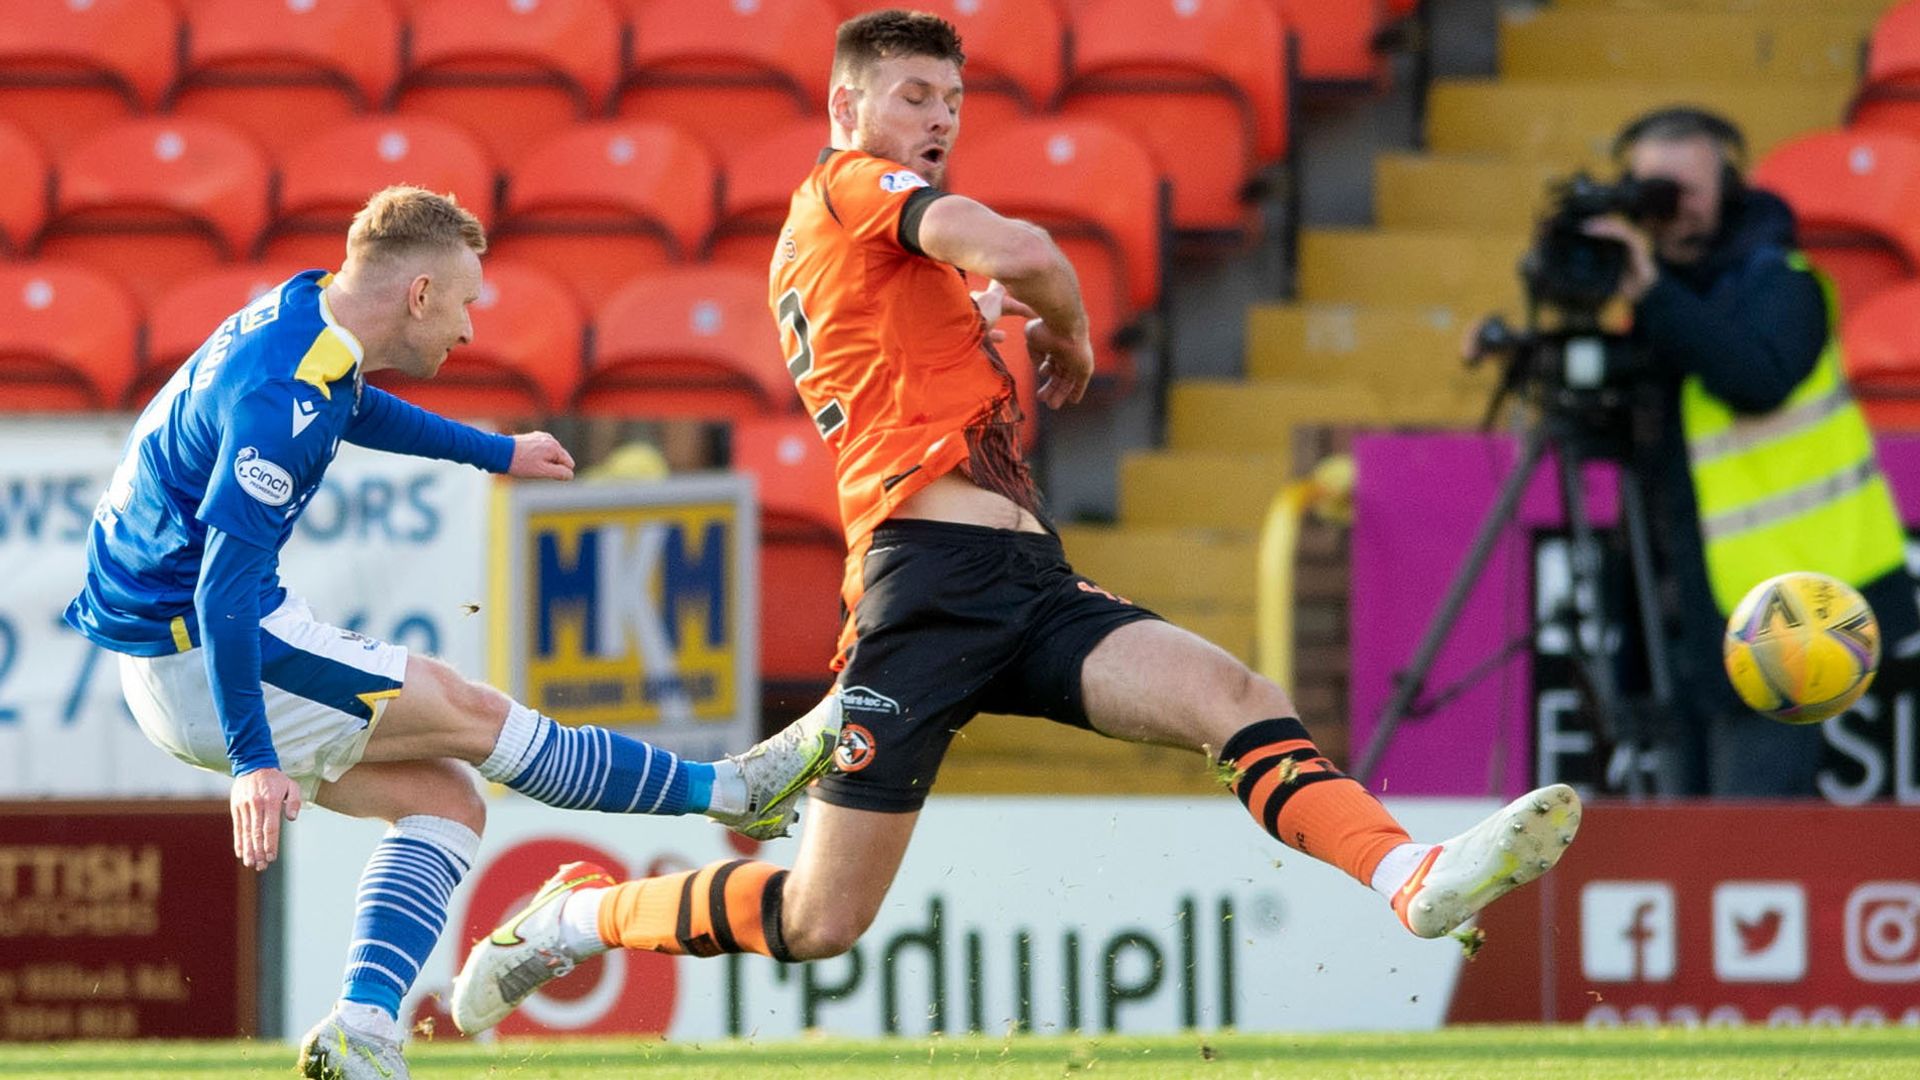 St Johnstone clinch narrow win at Dundee United